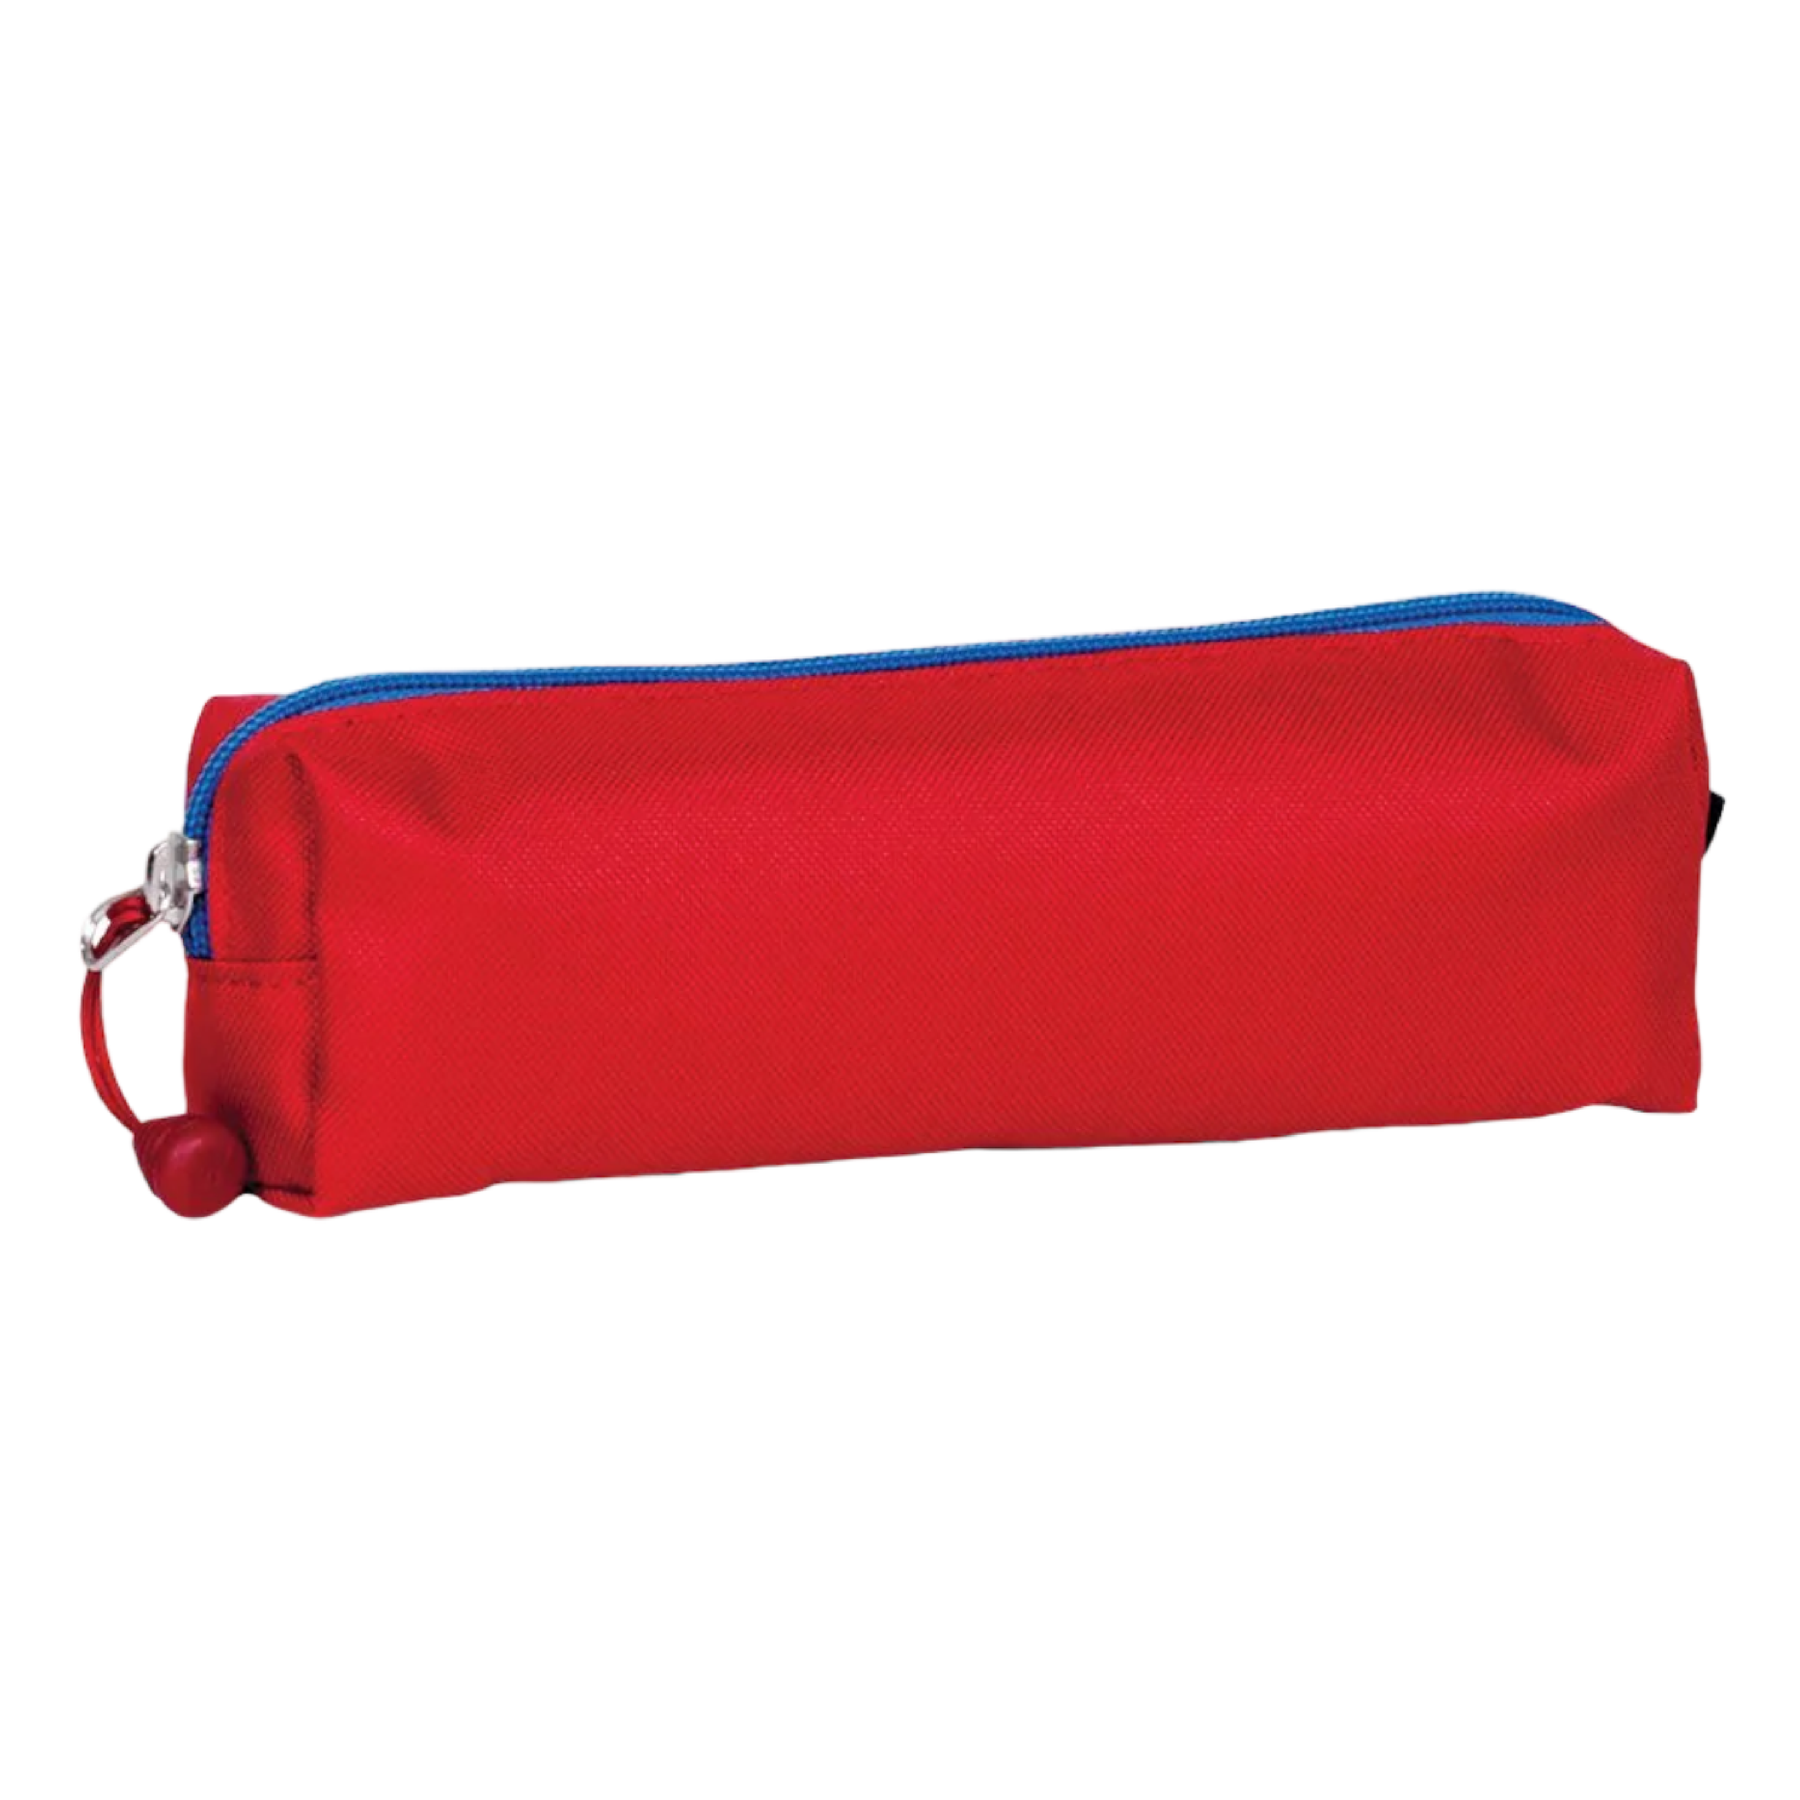 Stationery Pal Multi-functional Dual-Zippered Pencil Case - Burgundy Red